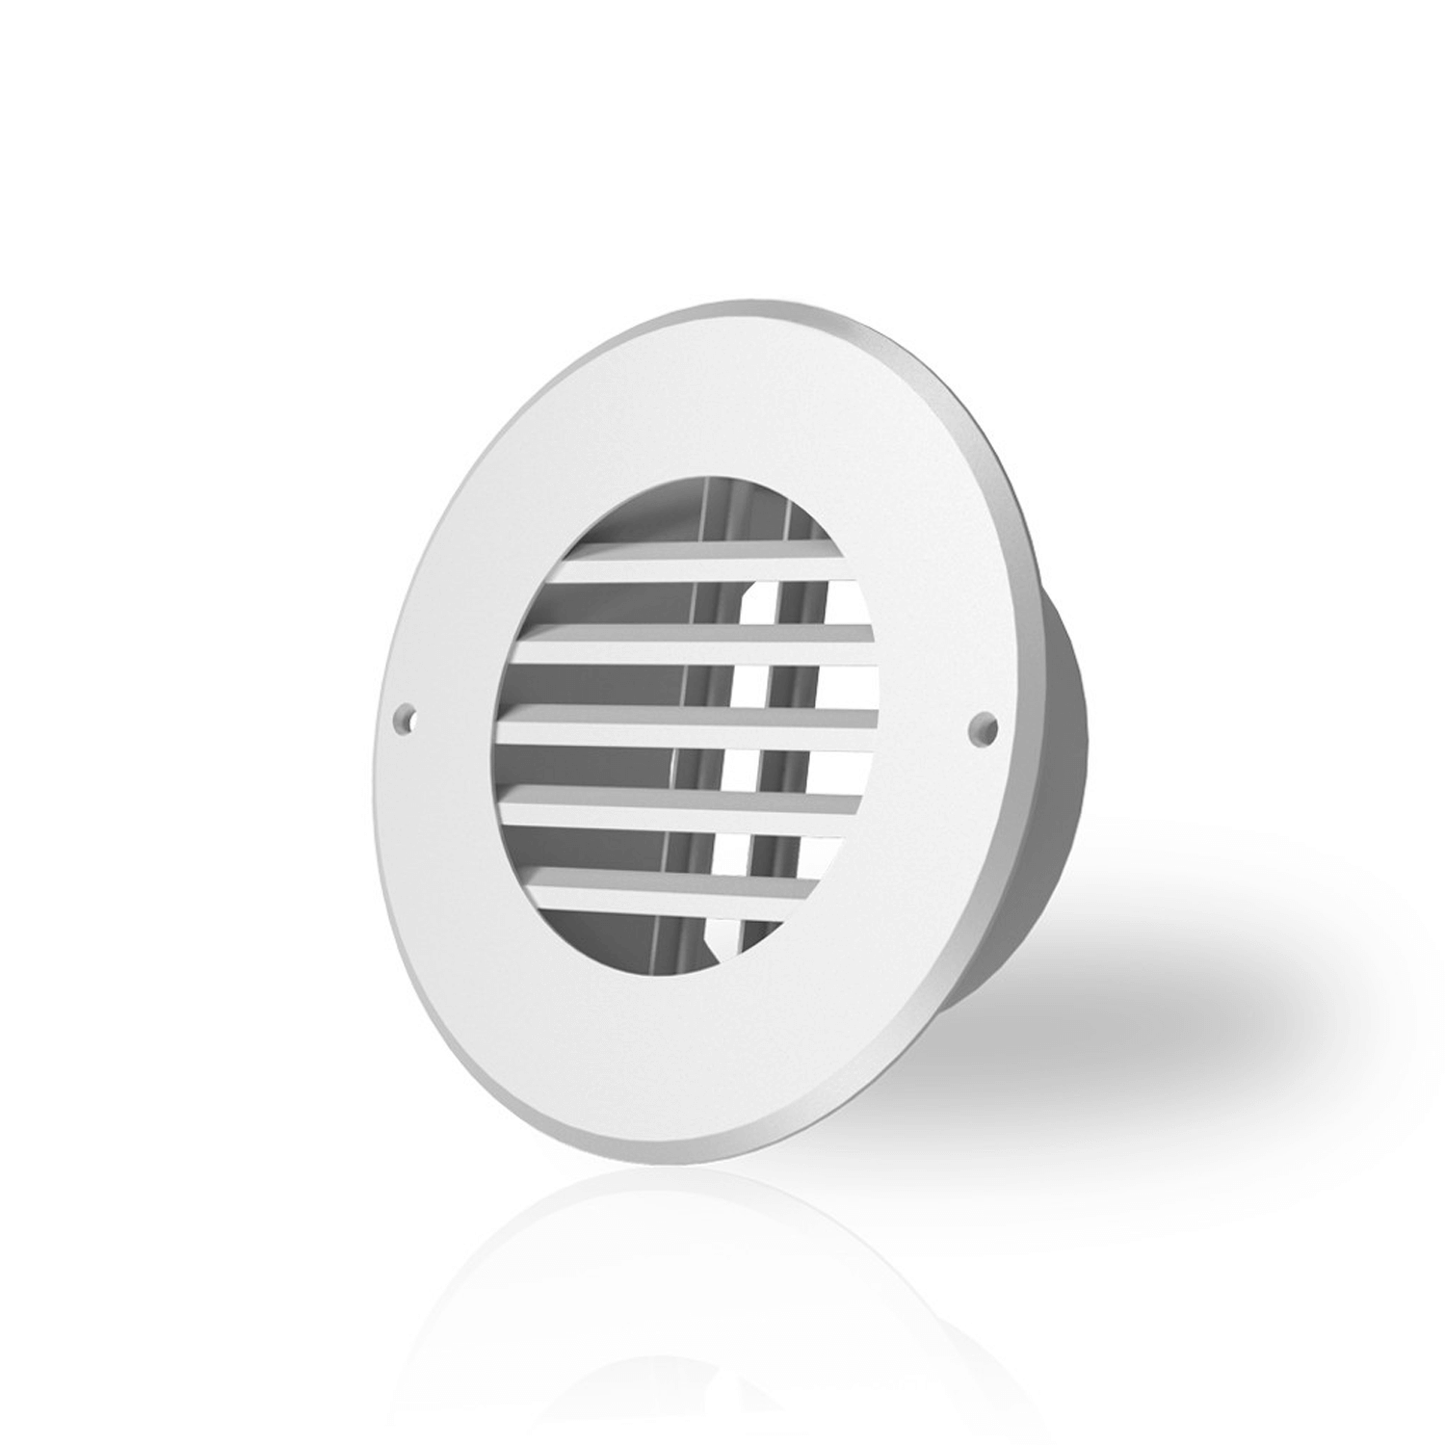 AC Infinity Wall Mount Duct Grille Vent, White Steel, 4-Inch AC-DGM4-W Climate Control 819137020696